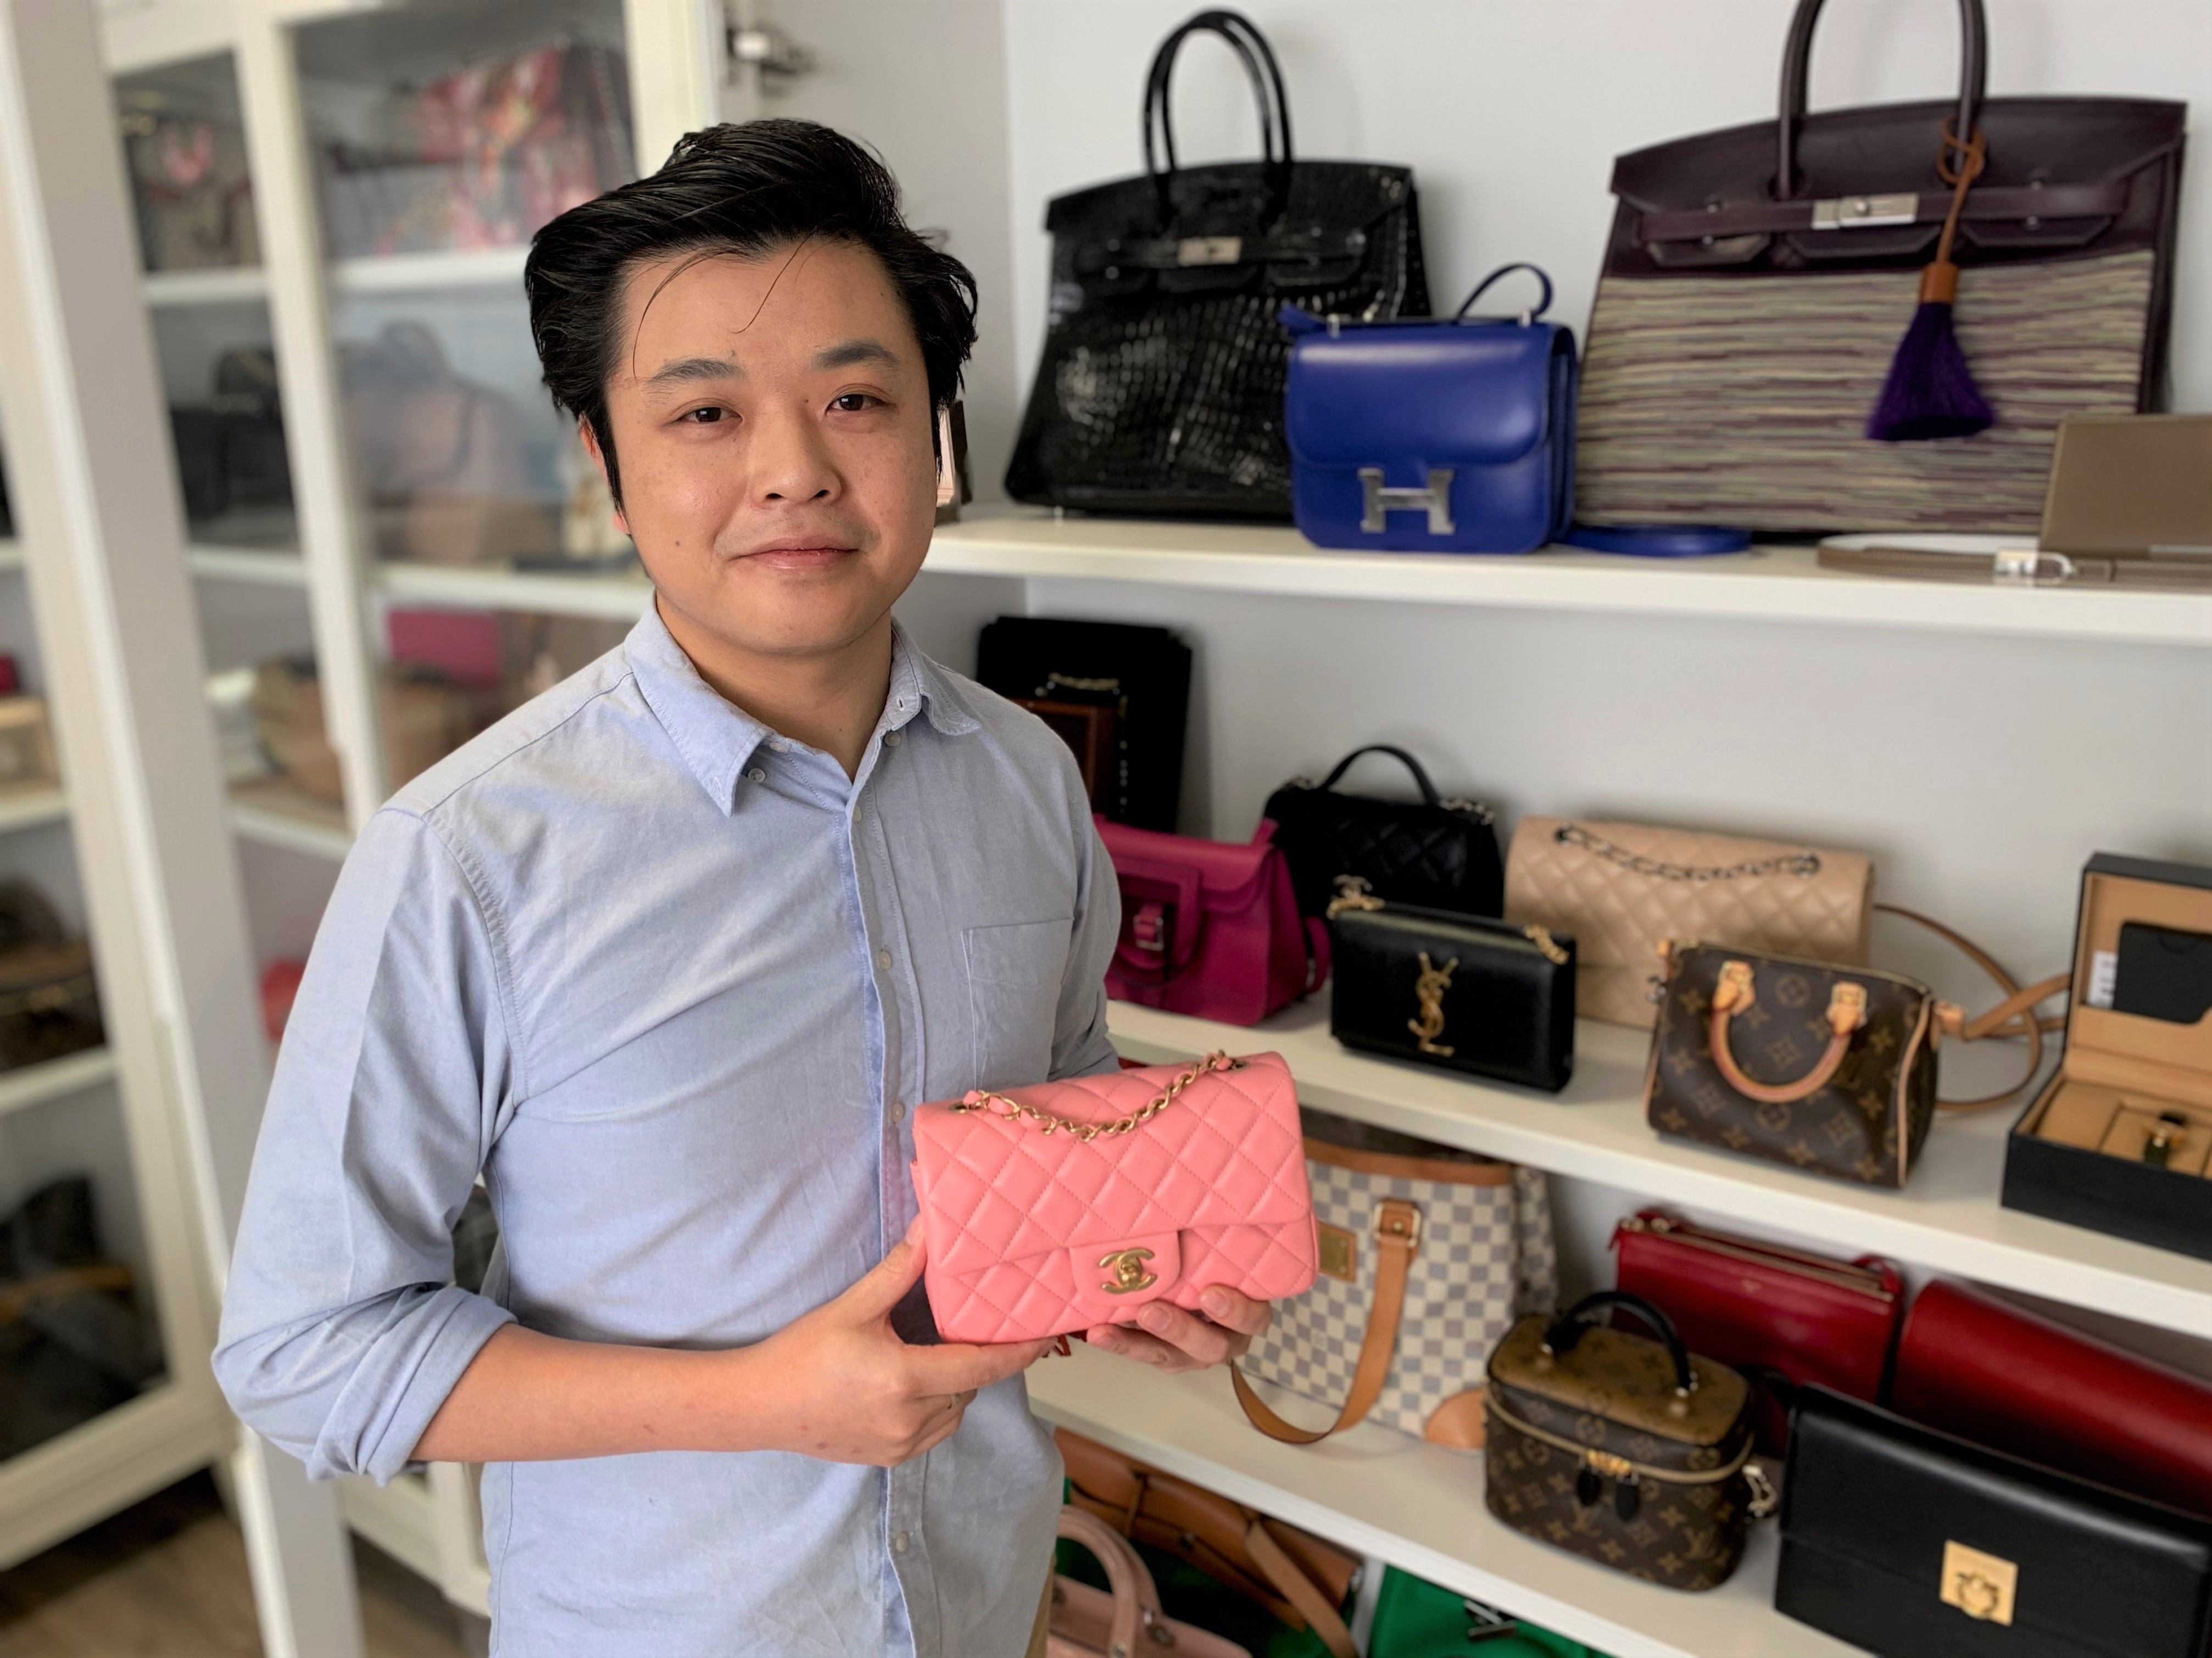 Alex Leung traded a career in finance to start his own business.